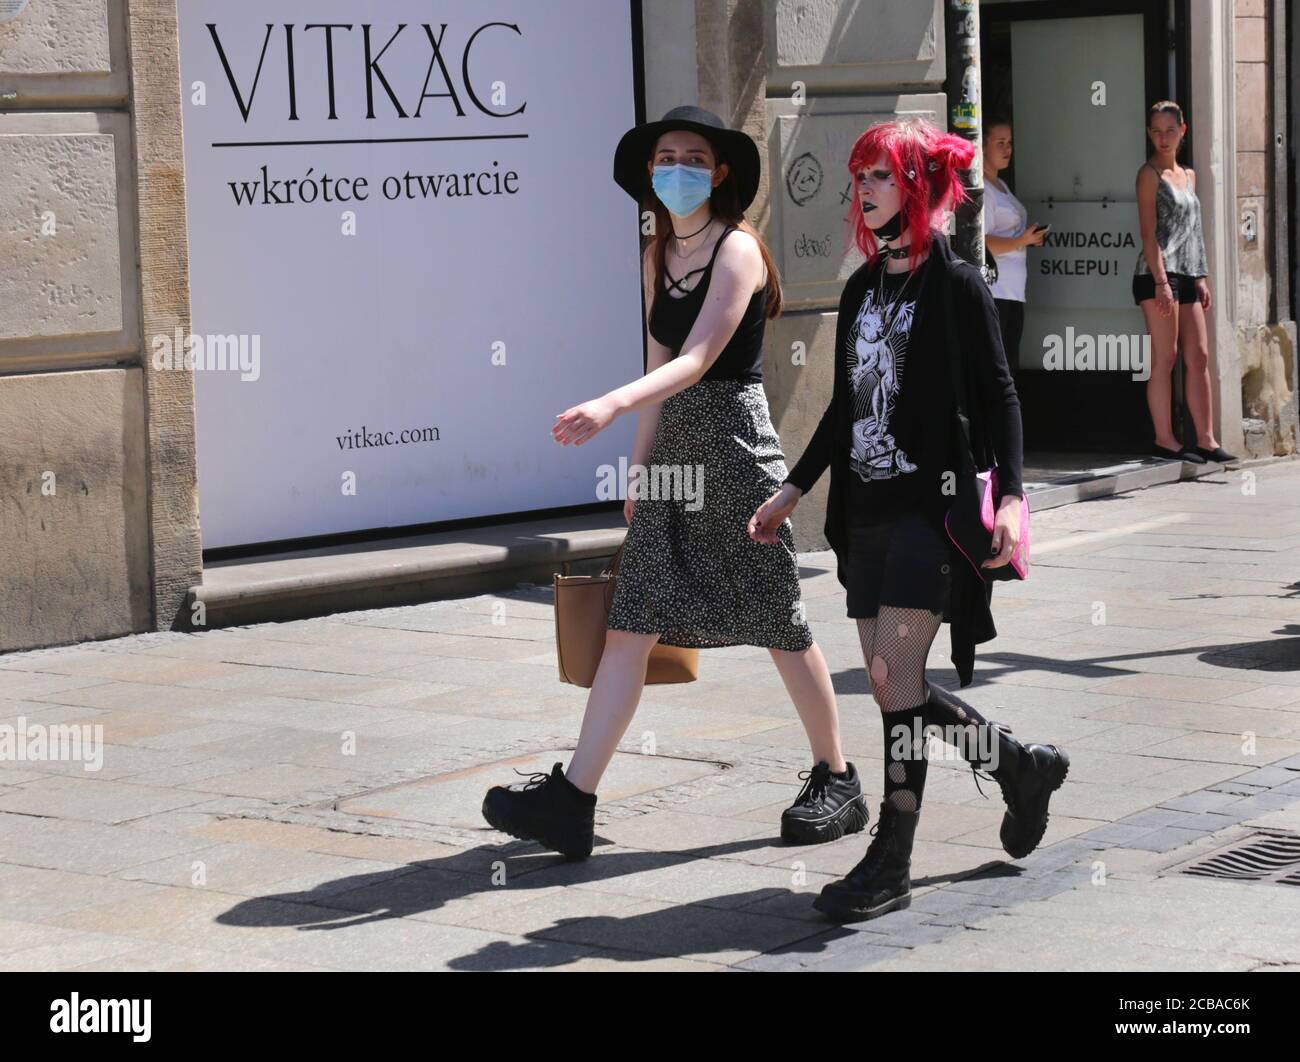 Cracow. Krakow. Poland. Young girls wearing goth outfits and mask